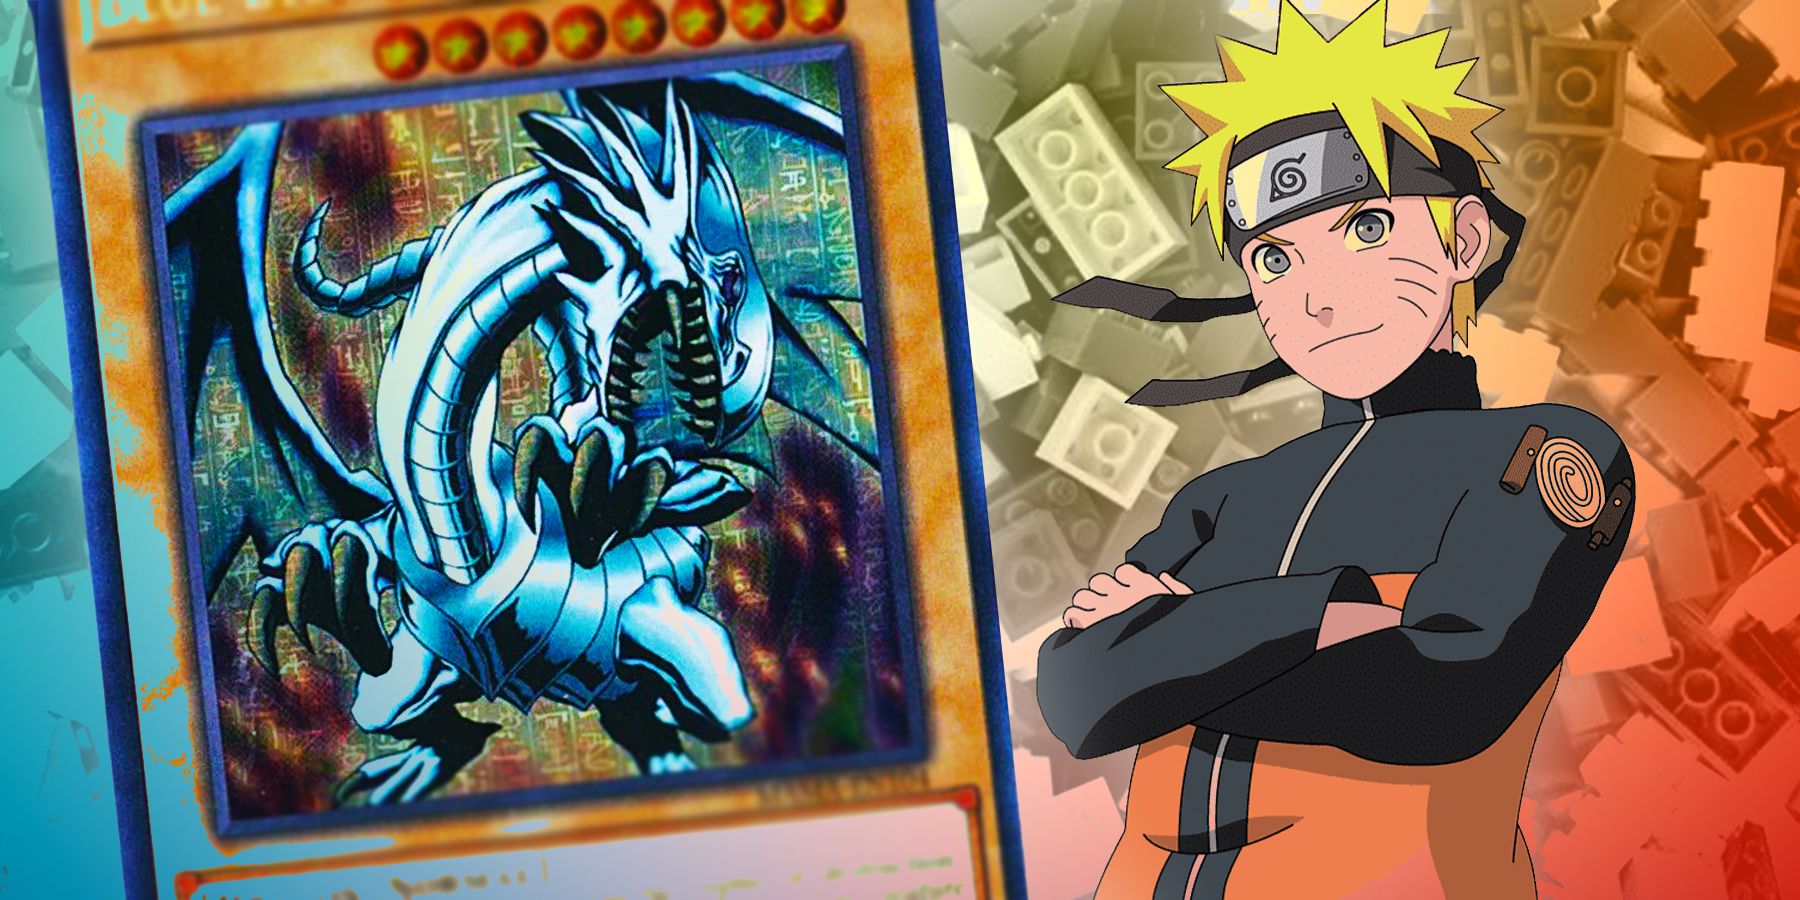 On the left, the Blue Eyes White Dragon Yu Gi Oh! card. On the right, Naruto. The background is  pile of legos.